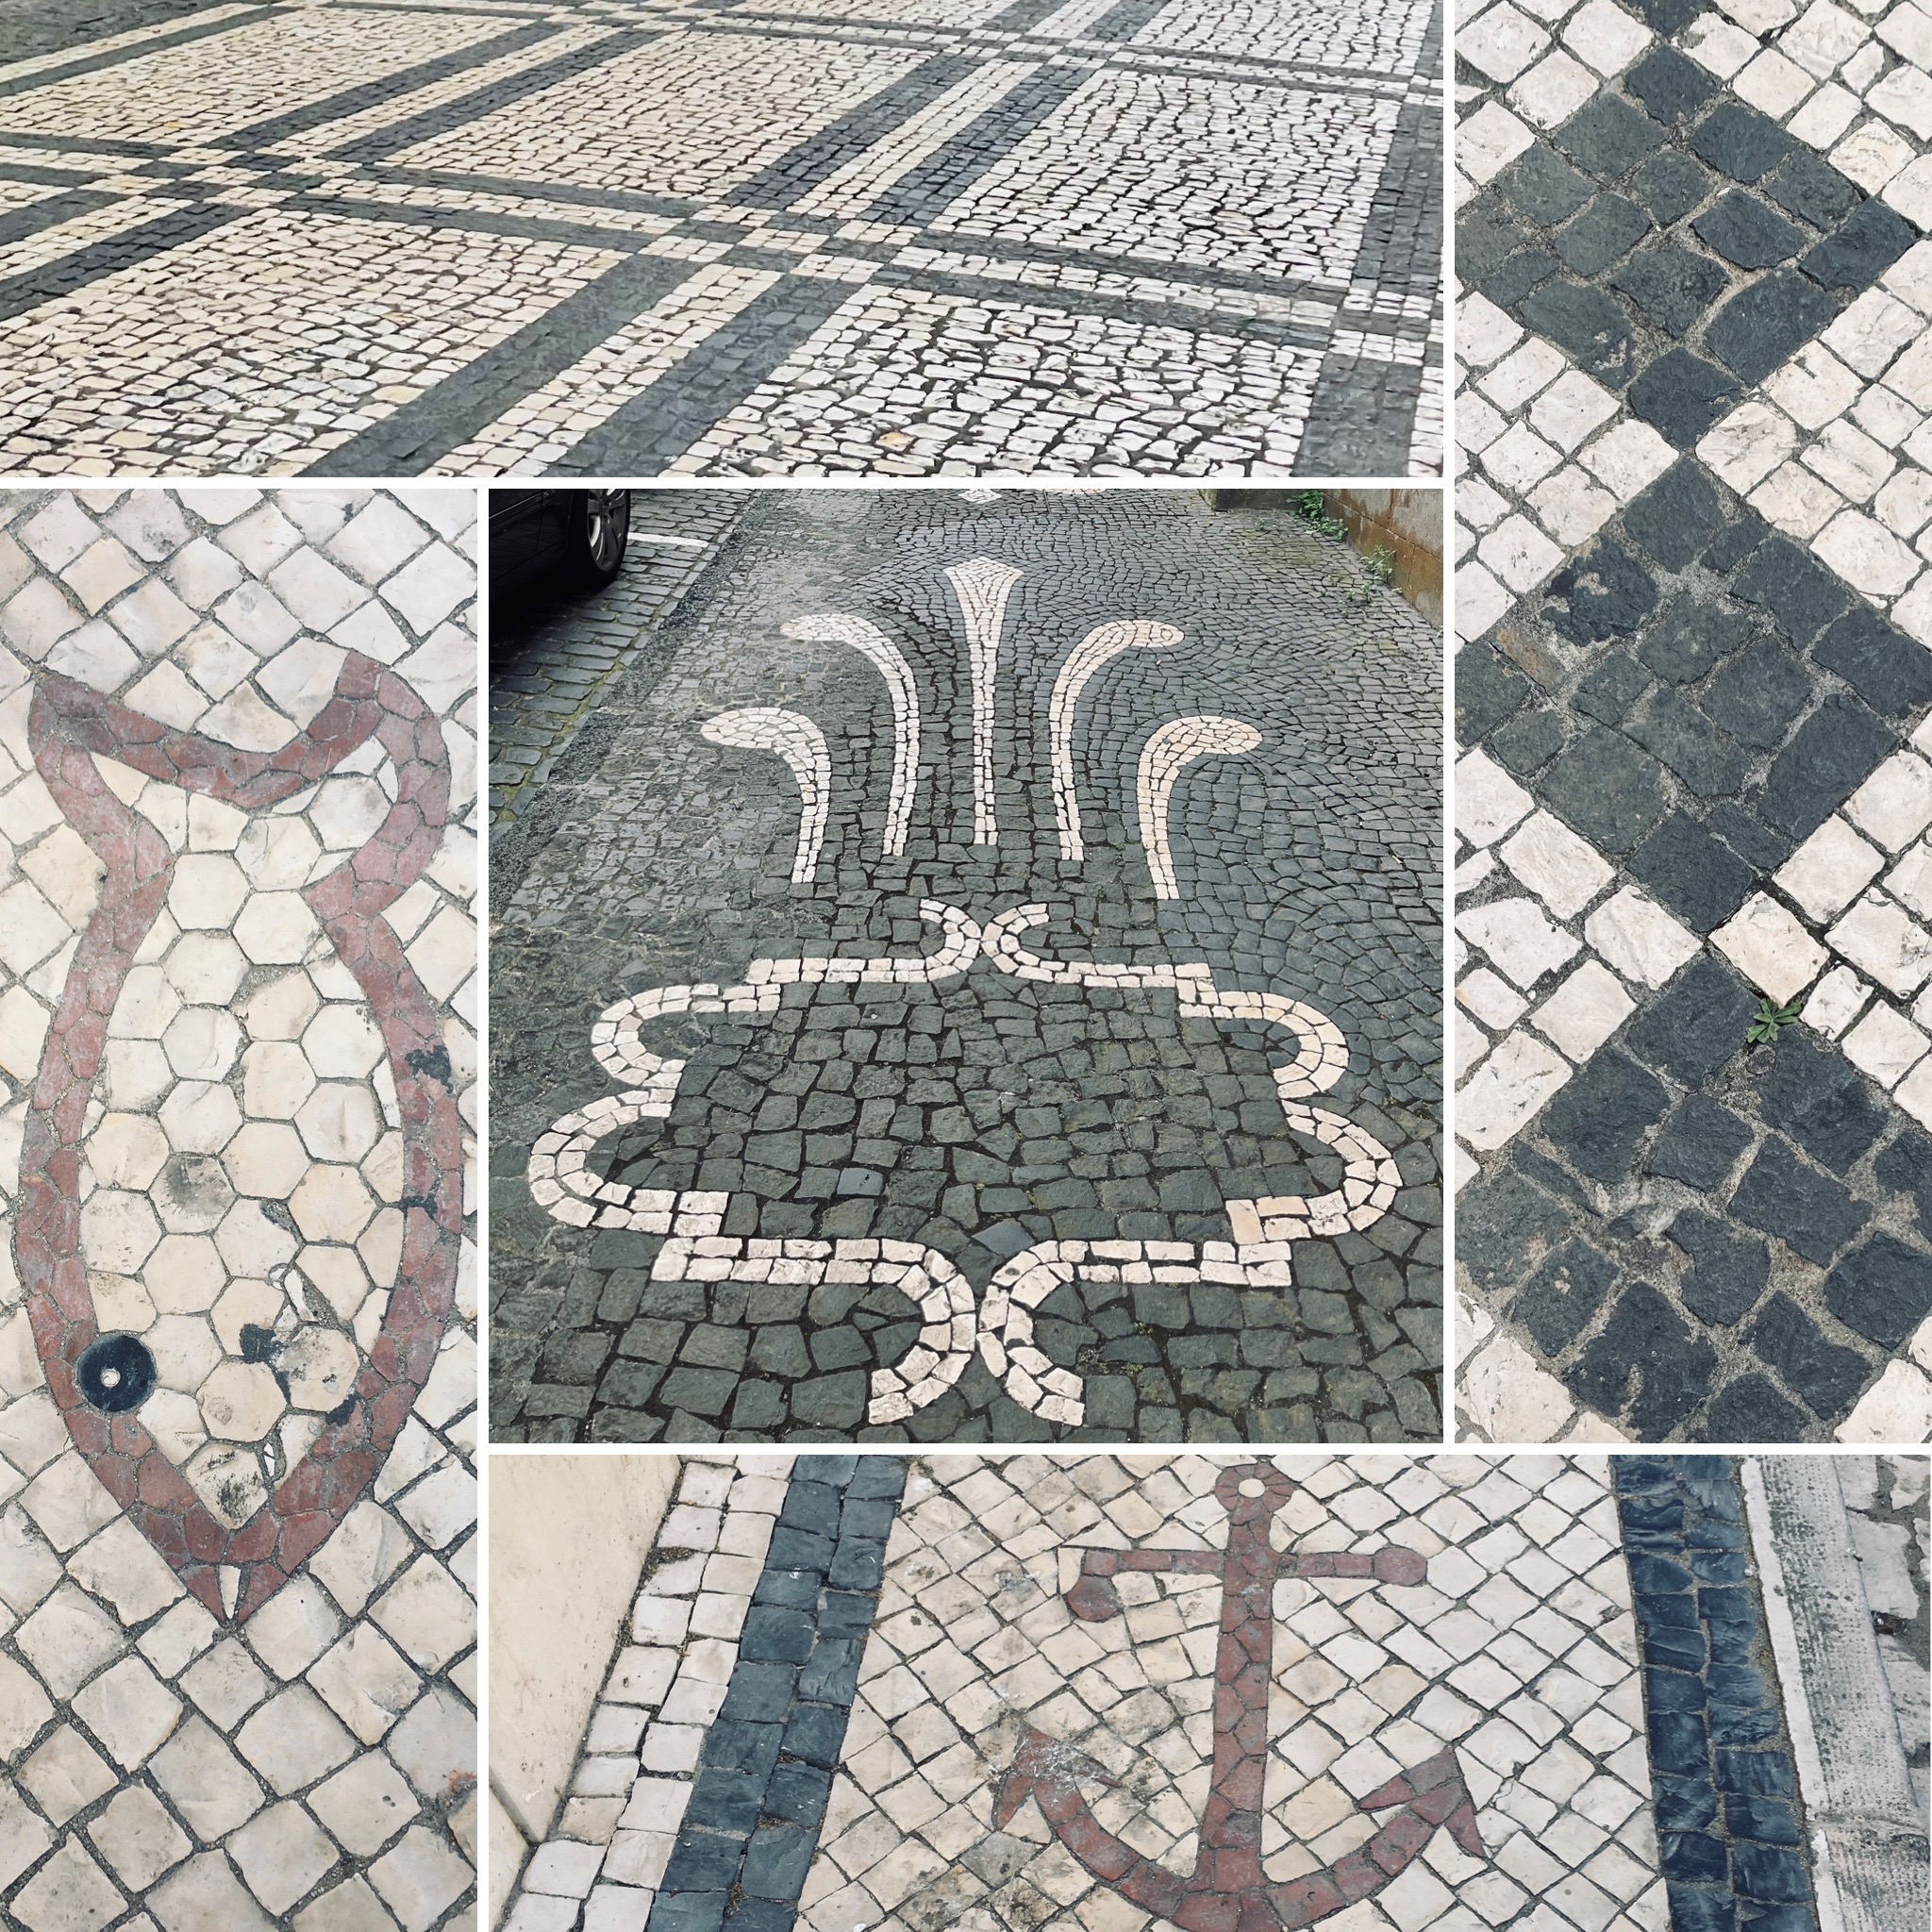 Patterns made from (mostly) squares of contrasting stones in the pavement of Portugal.